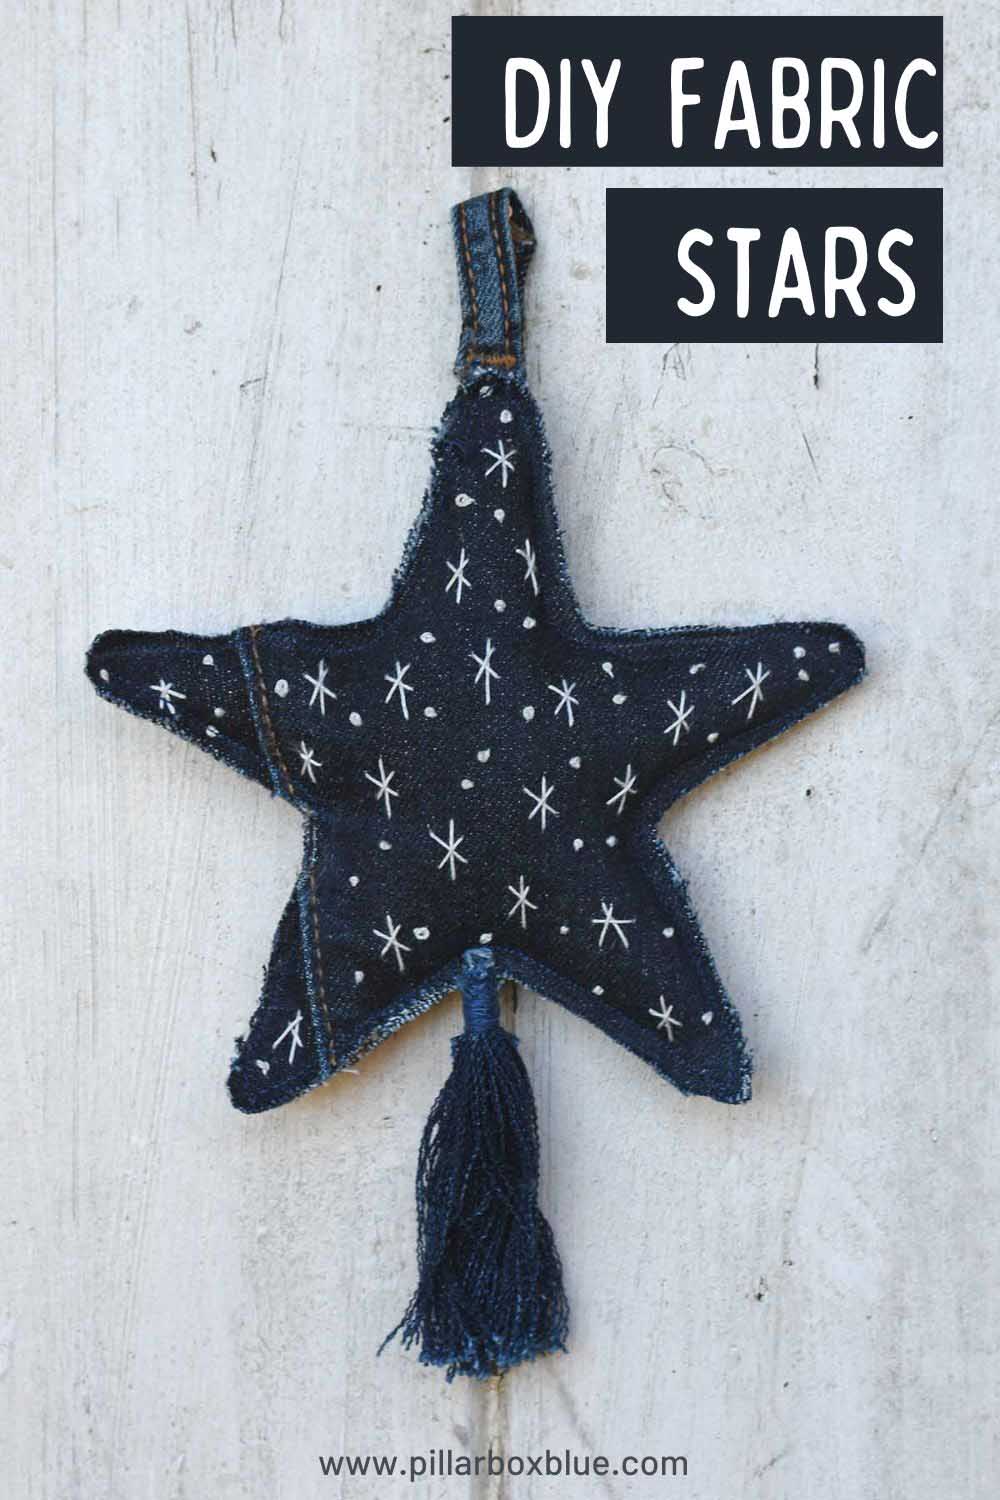 DIY embroidered fabric star ornament hanging